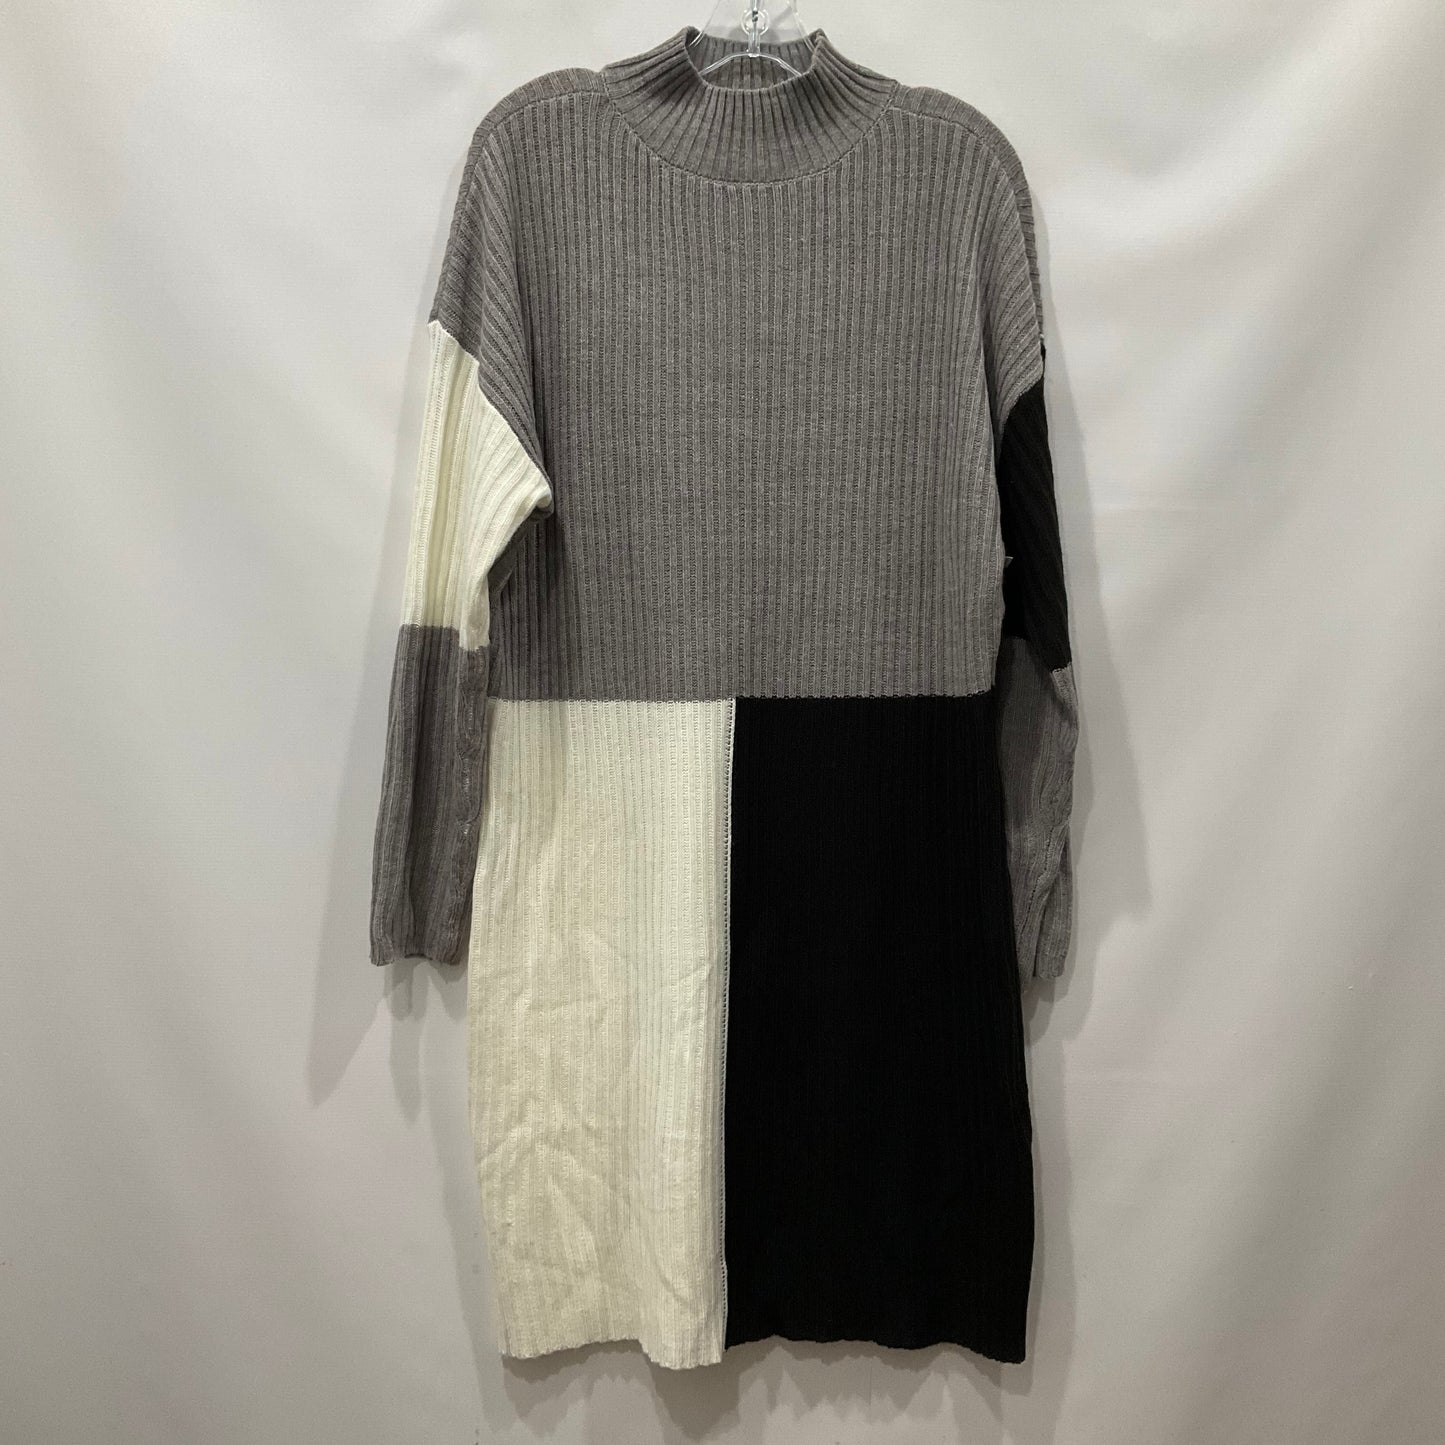 Dress Sweater By full circle threads  Size: 1x